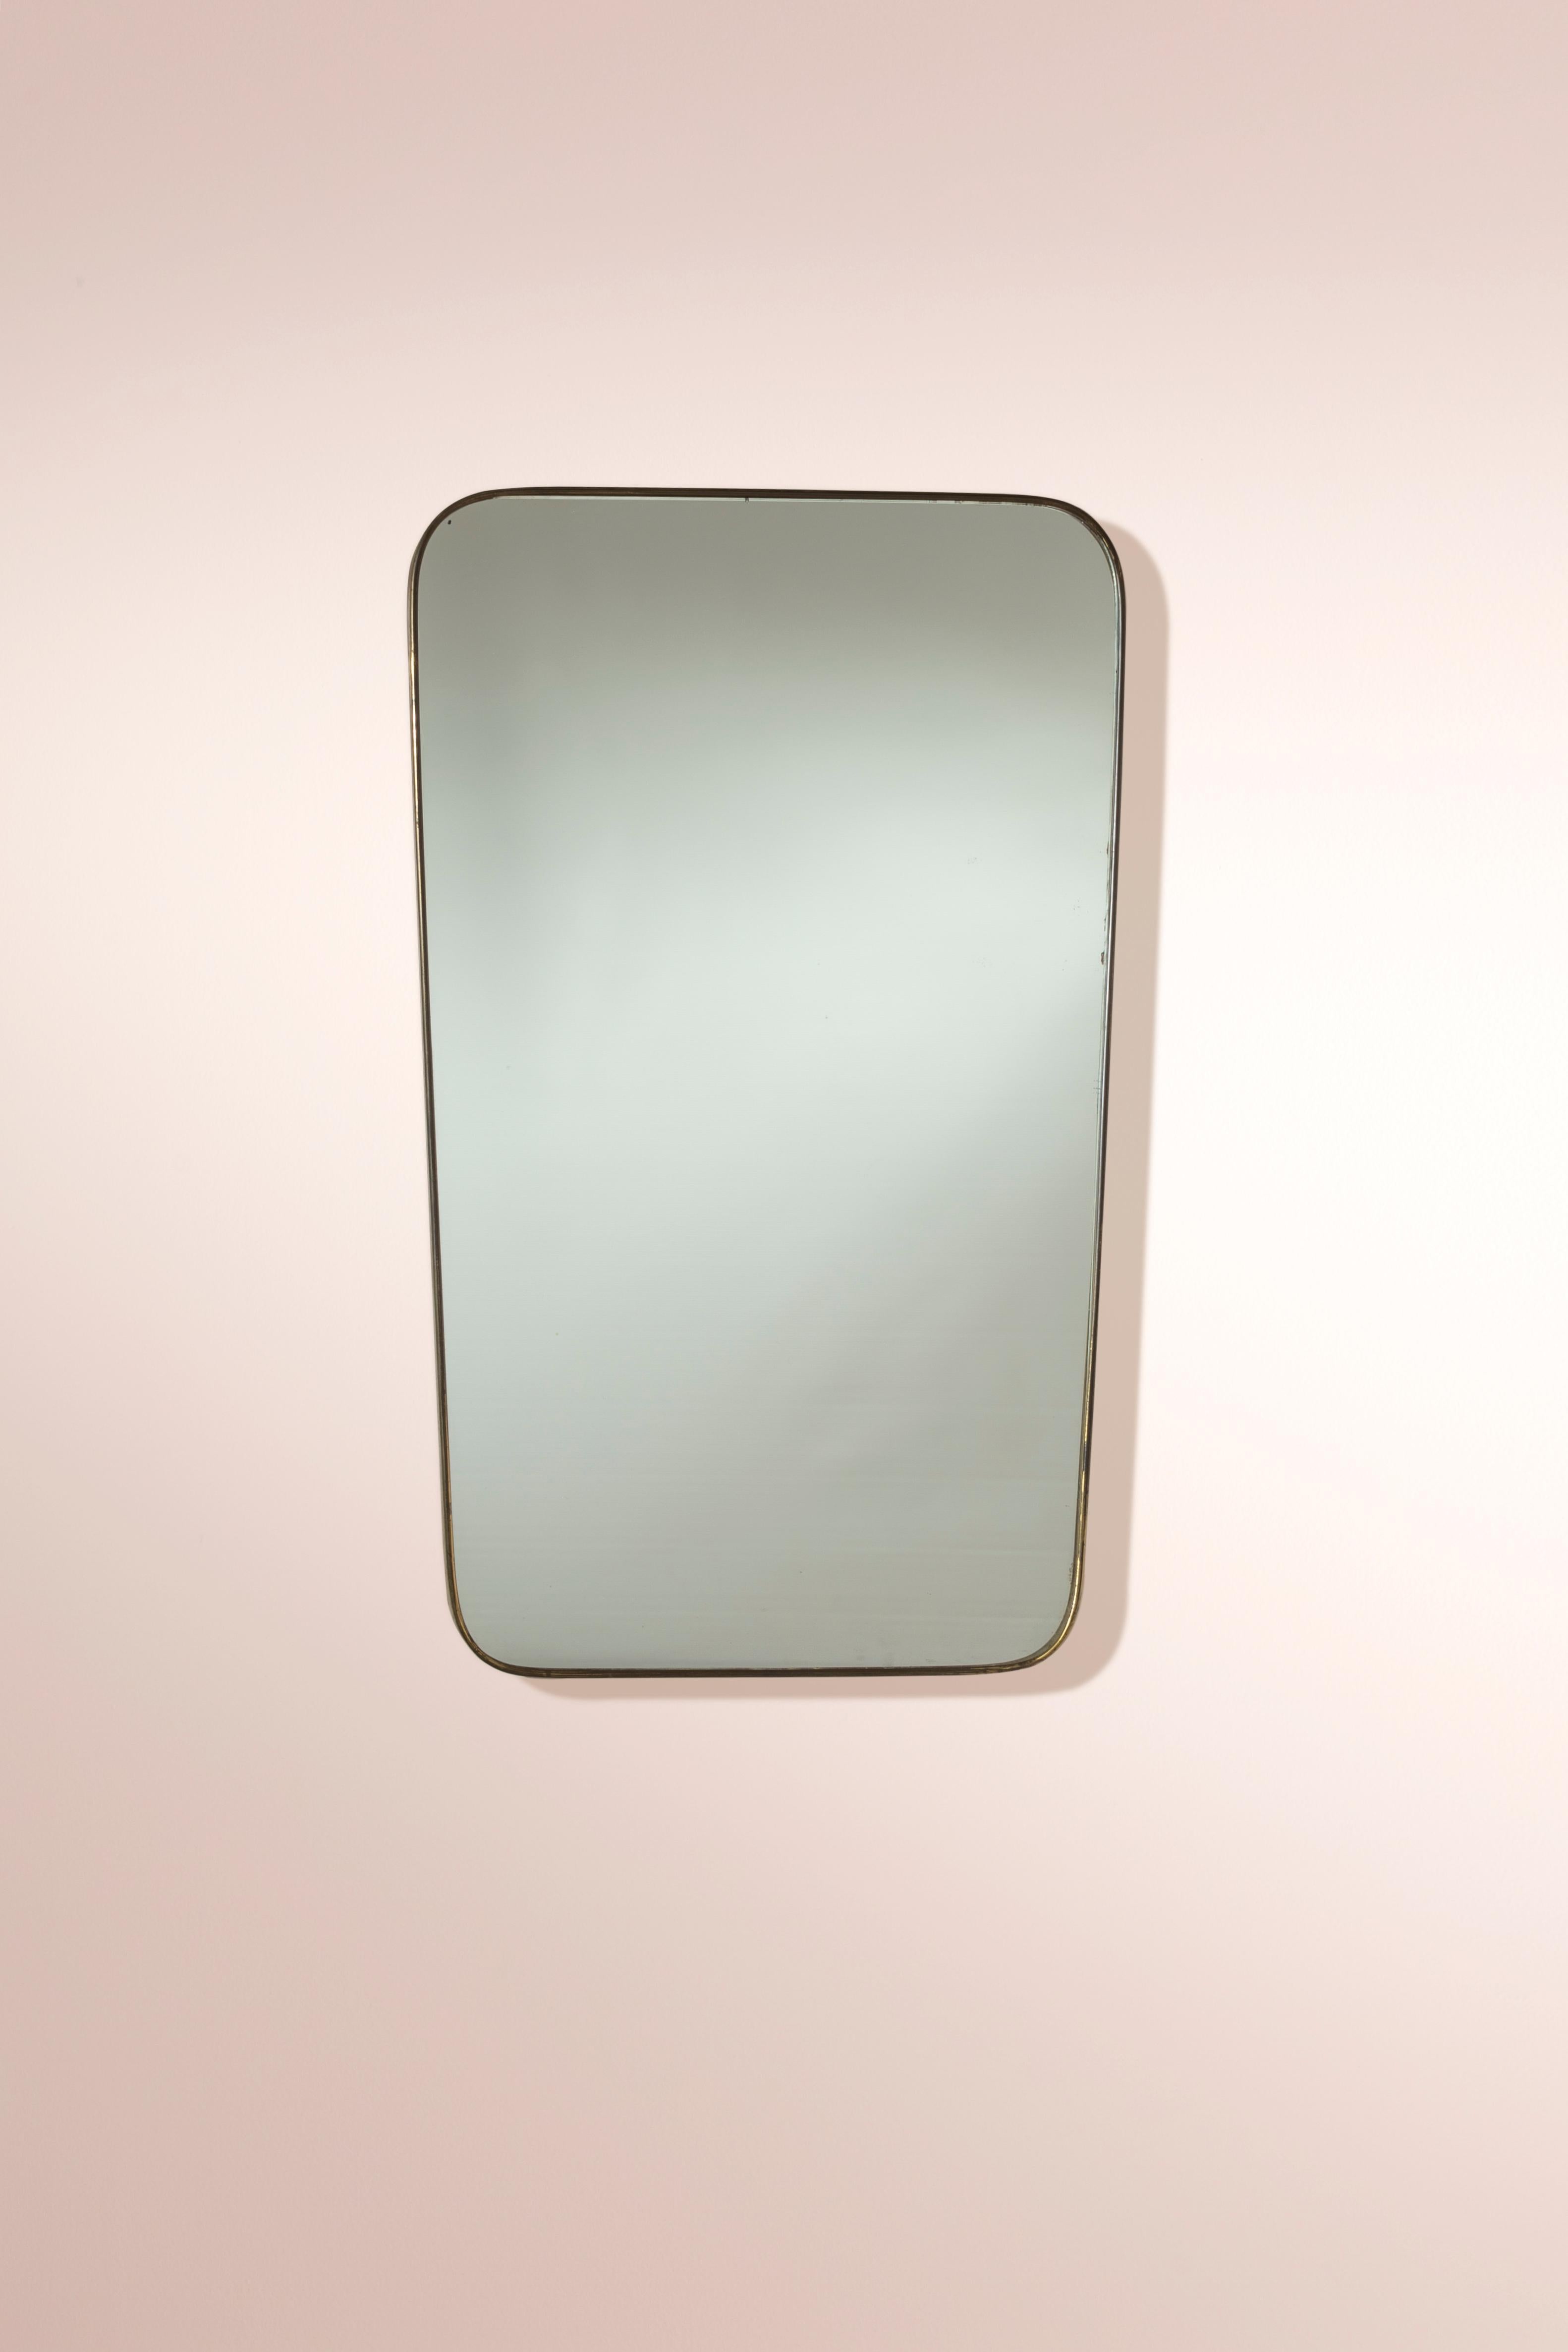 This beautiful Italian brass wall mirror, reminiscent of Gio Ponti's style and dating back to the 1950s, boasts an exquisite linear, elegant, and clean design that complements any interior, whether classic or modern.

Meticulously crafted, this